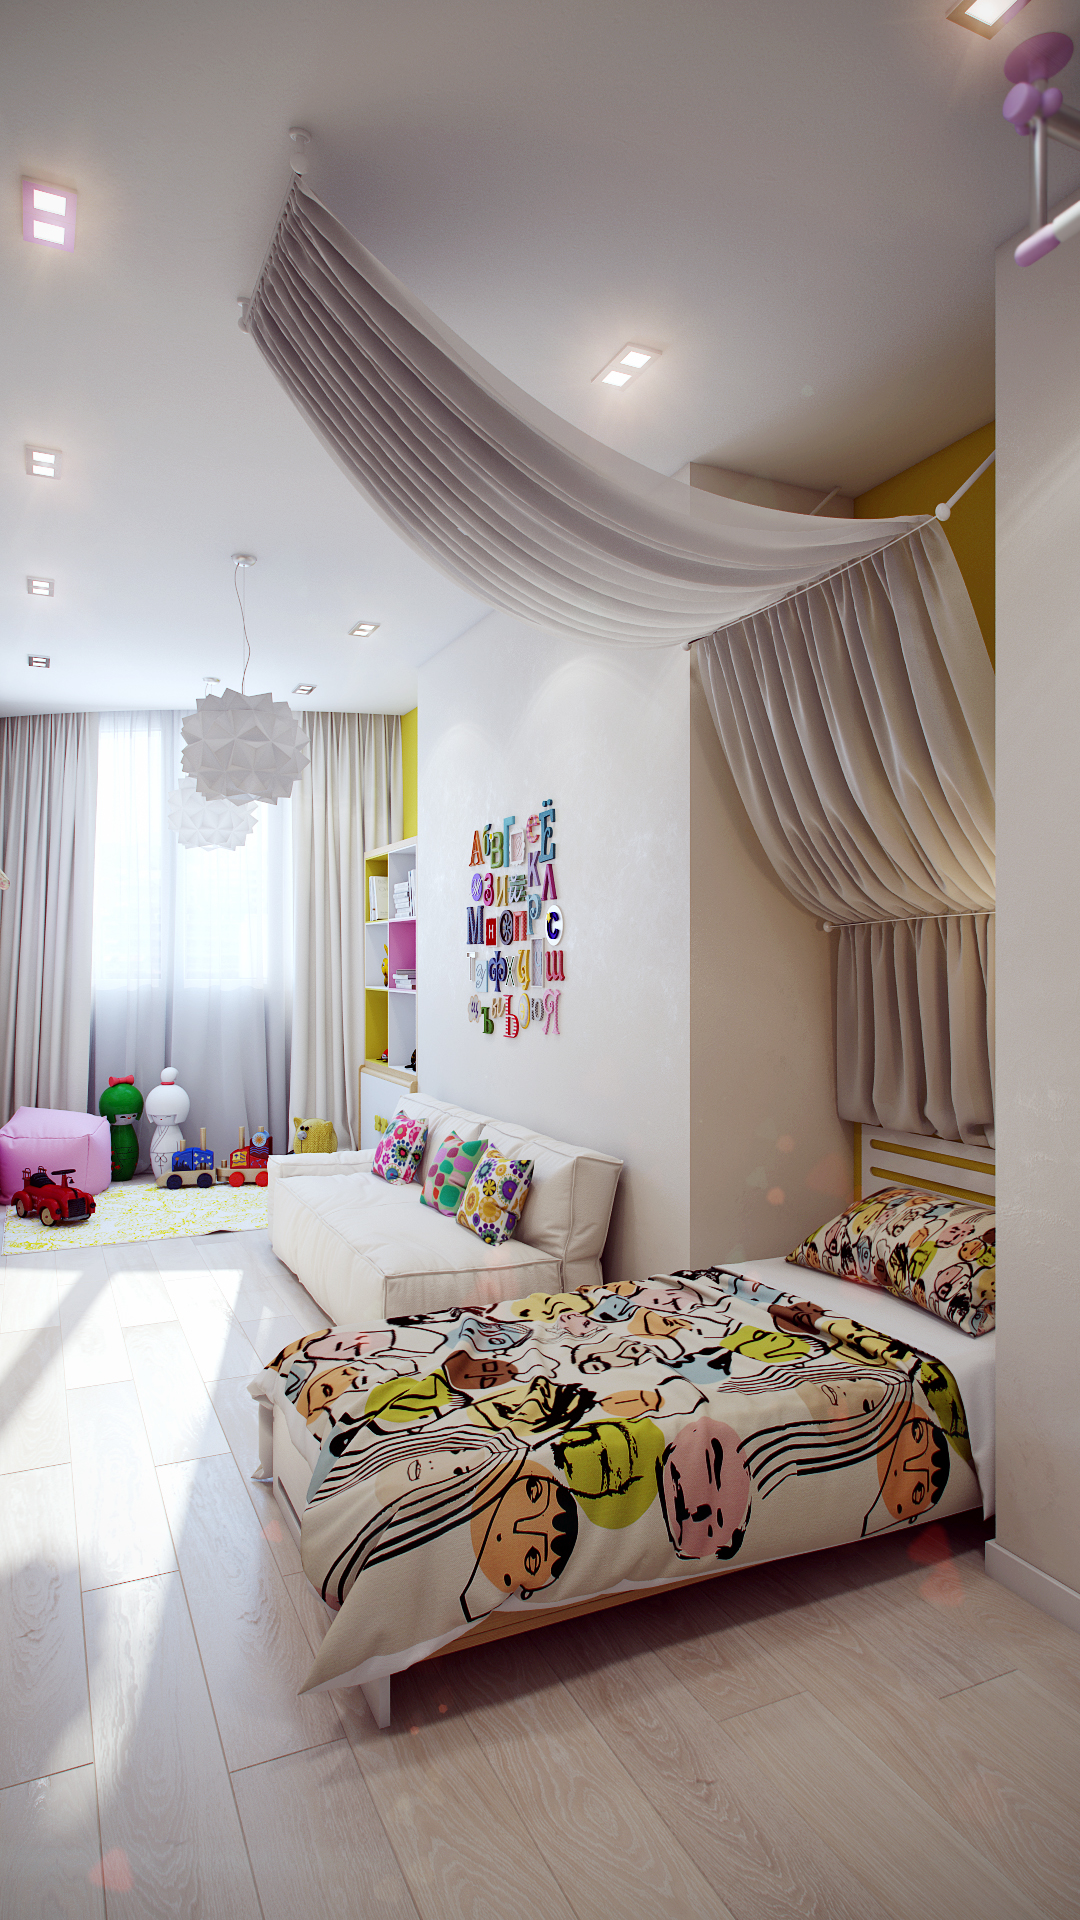 Kids Room Interior Design: Creating A Safe And Fun Environment For Kids